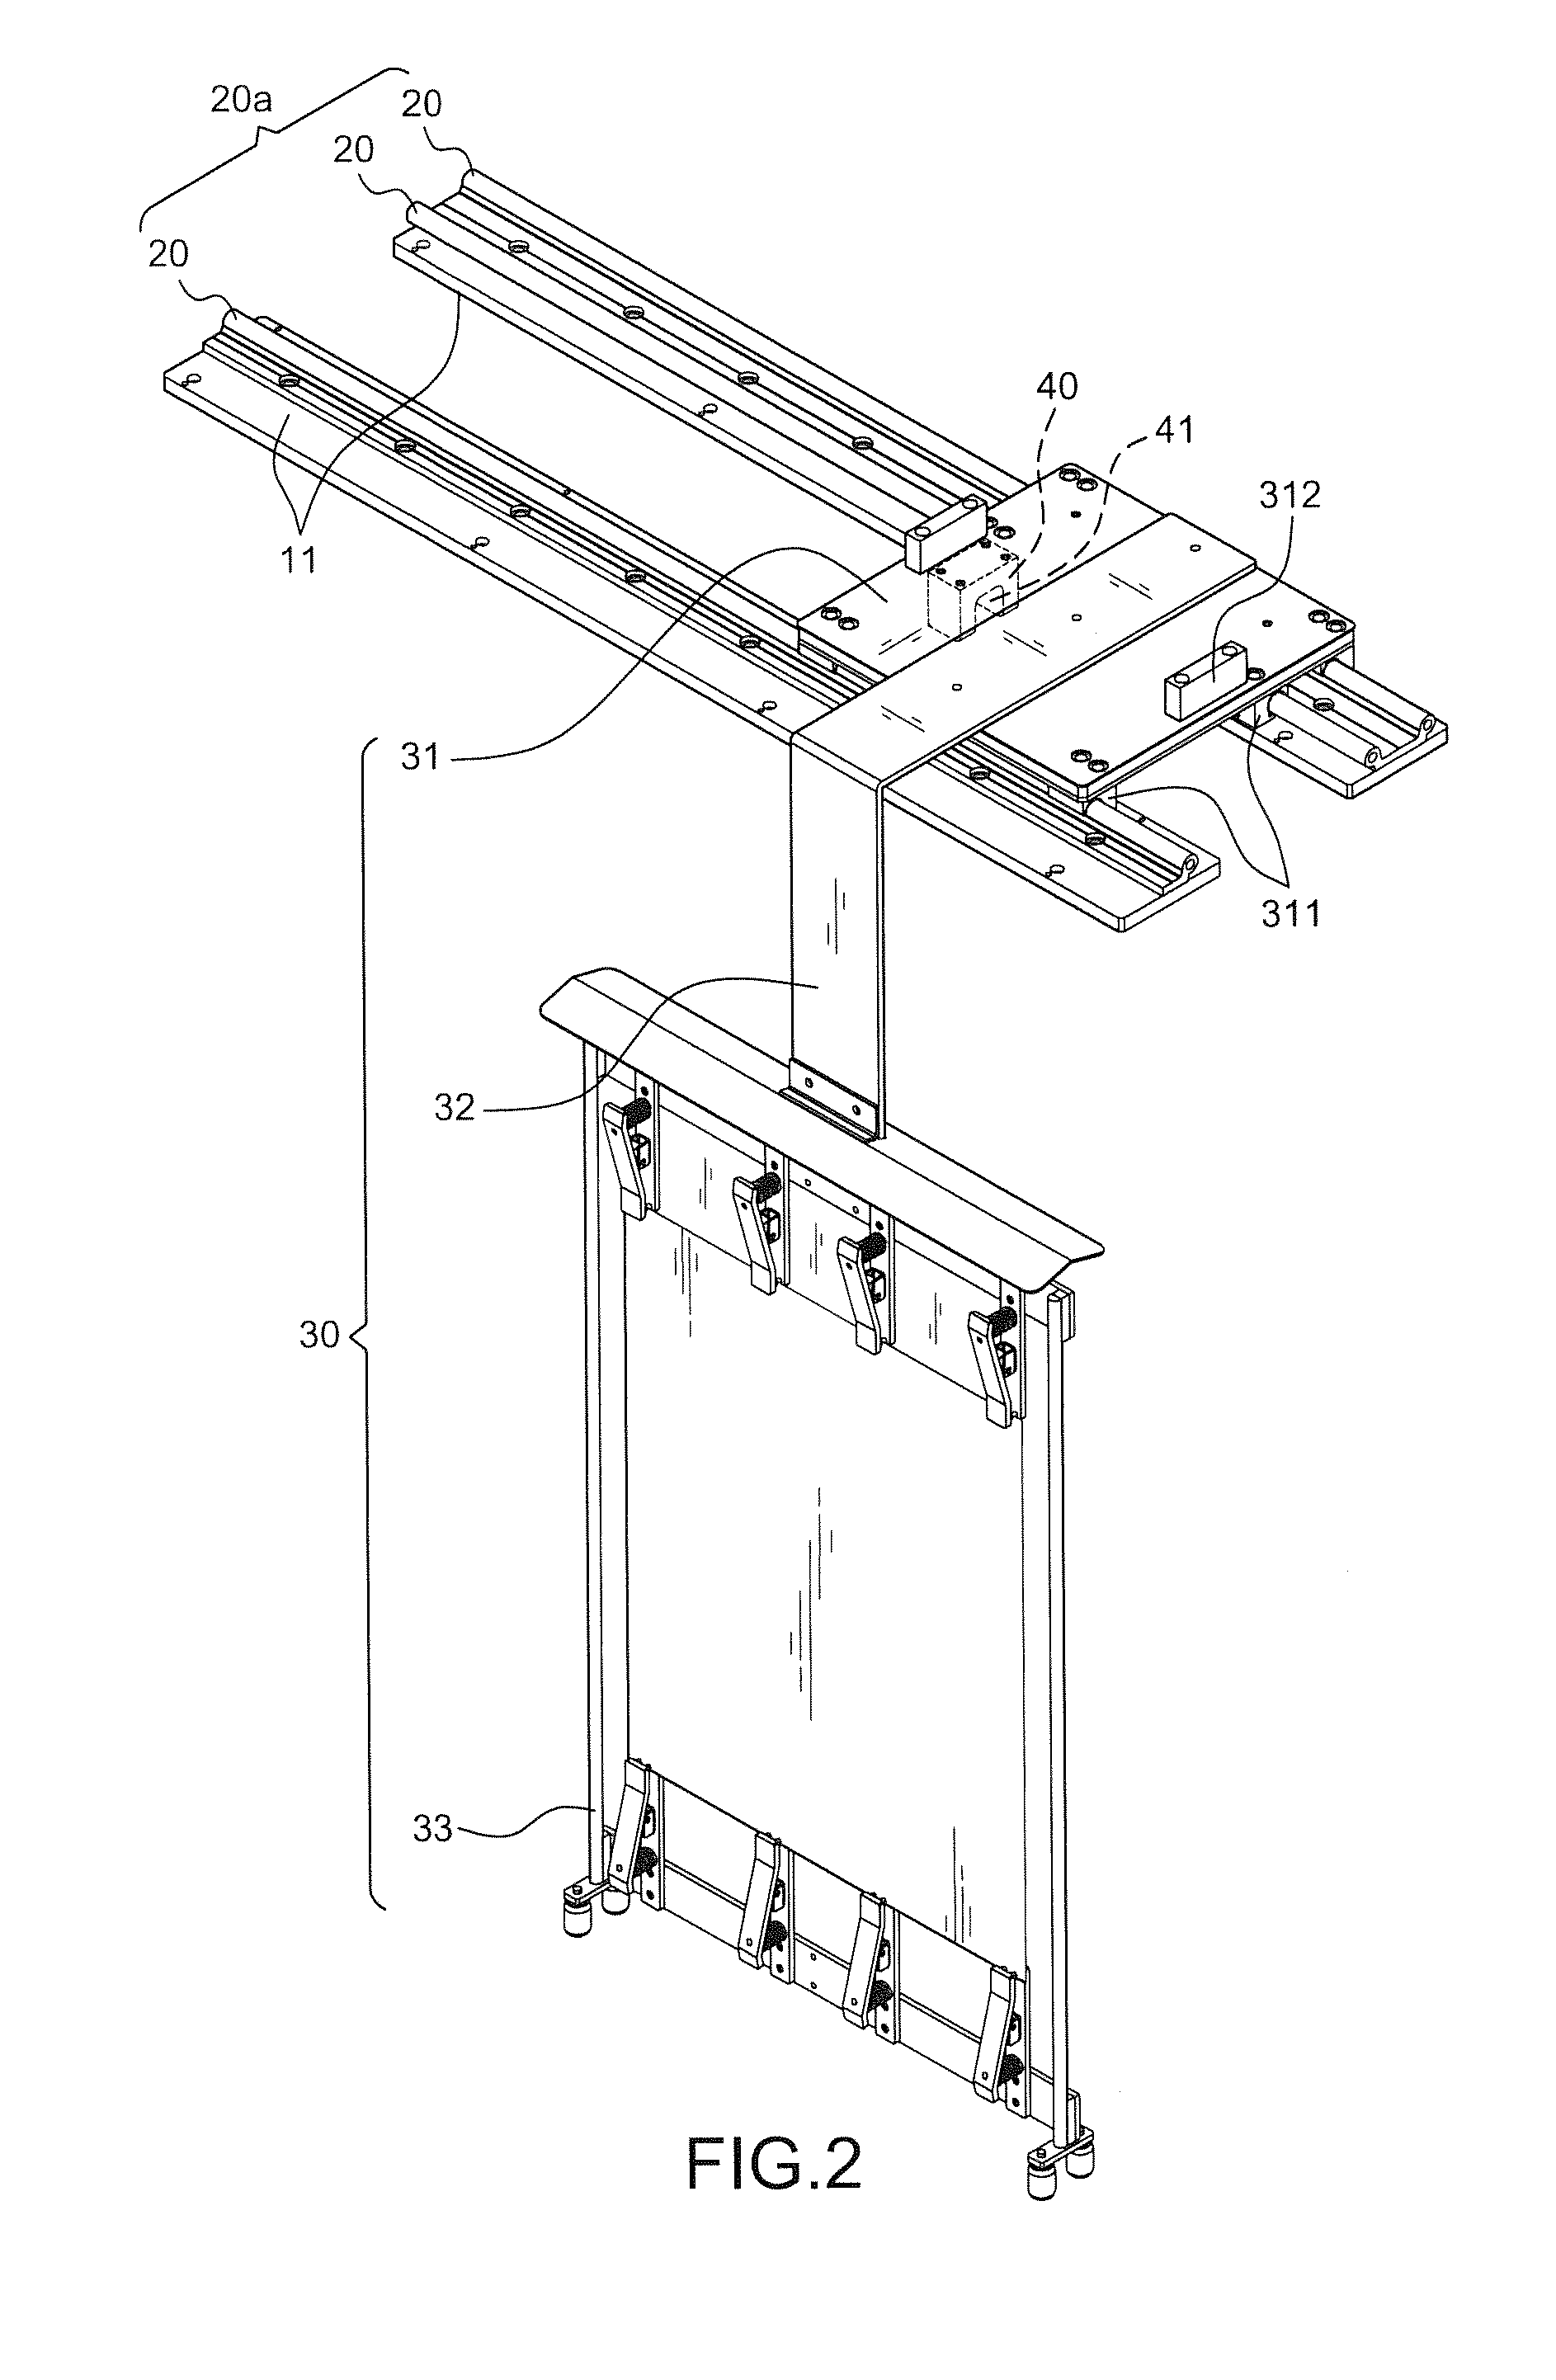 Hanger frames transportation device with gearing